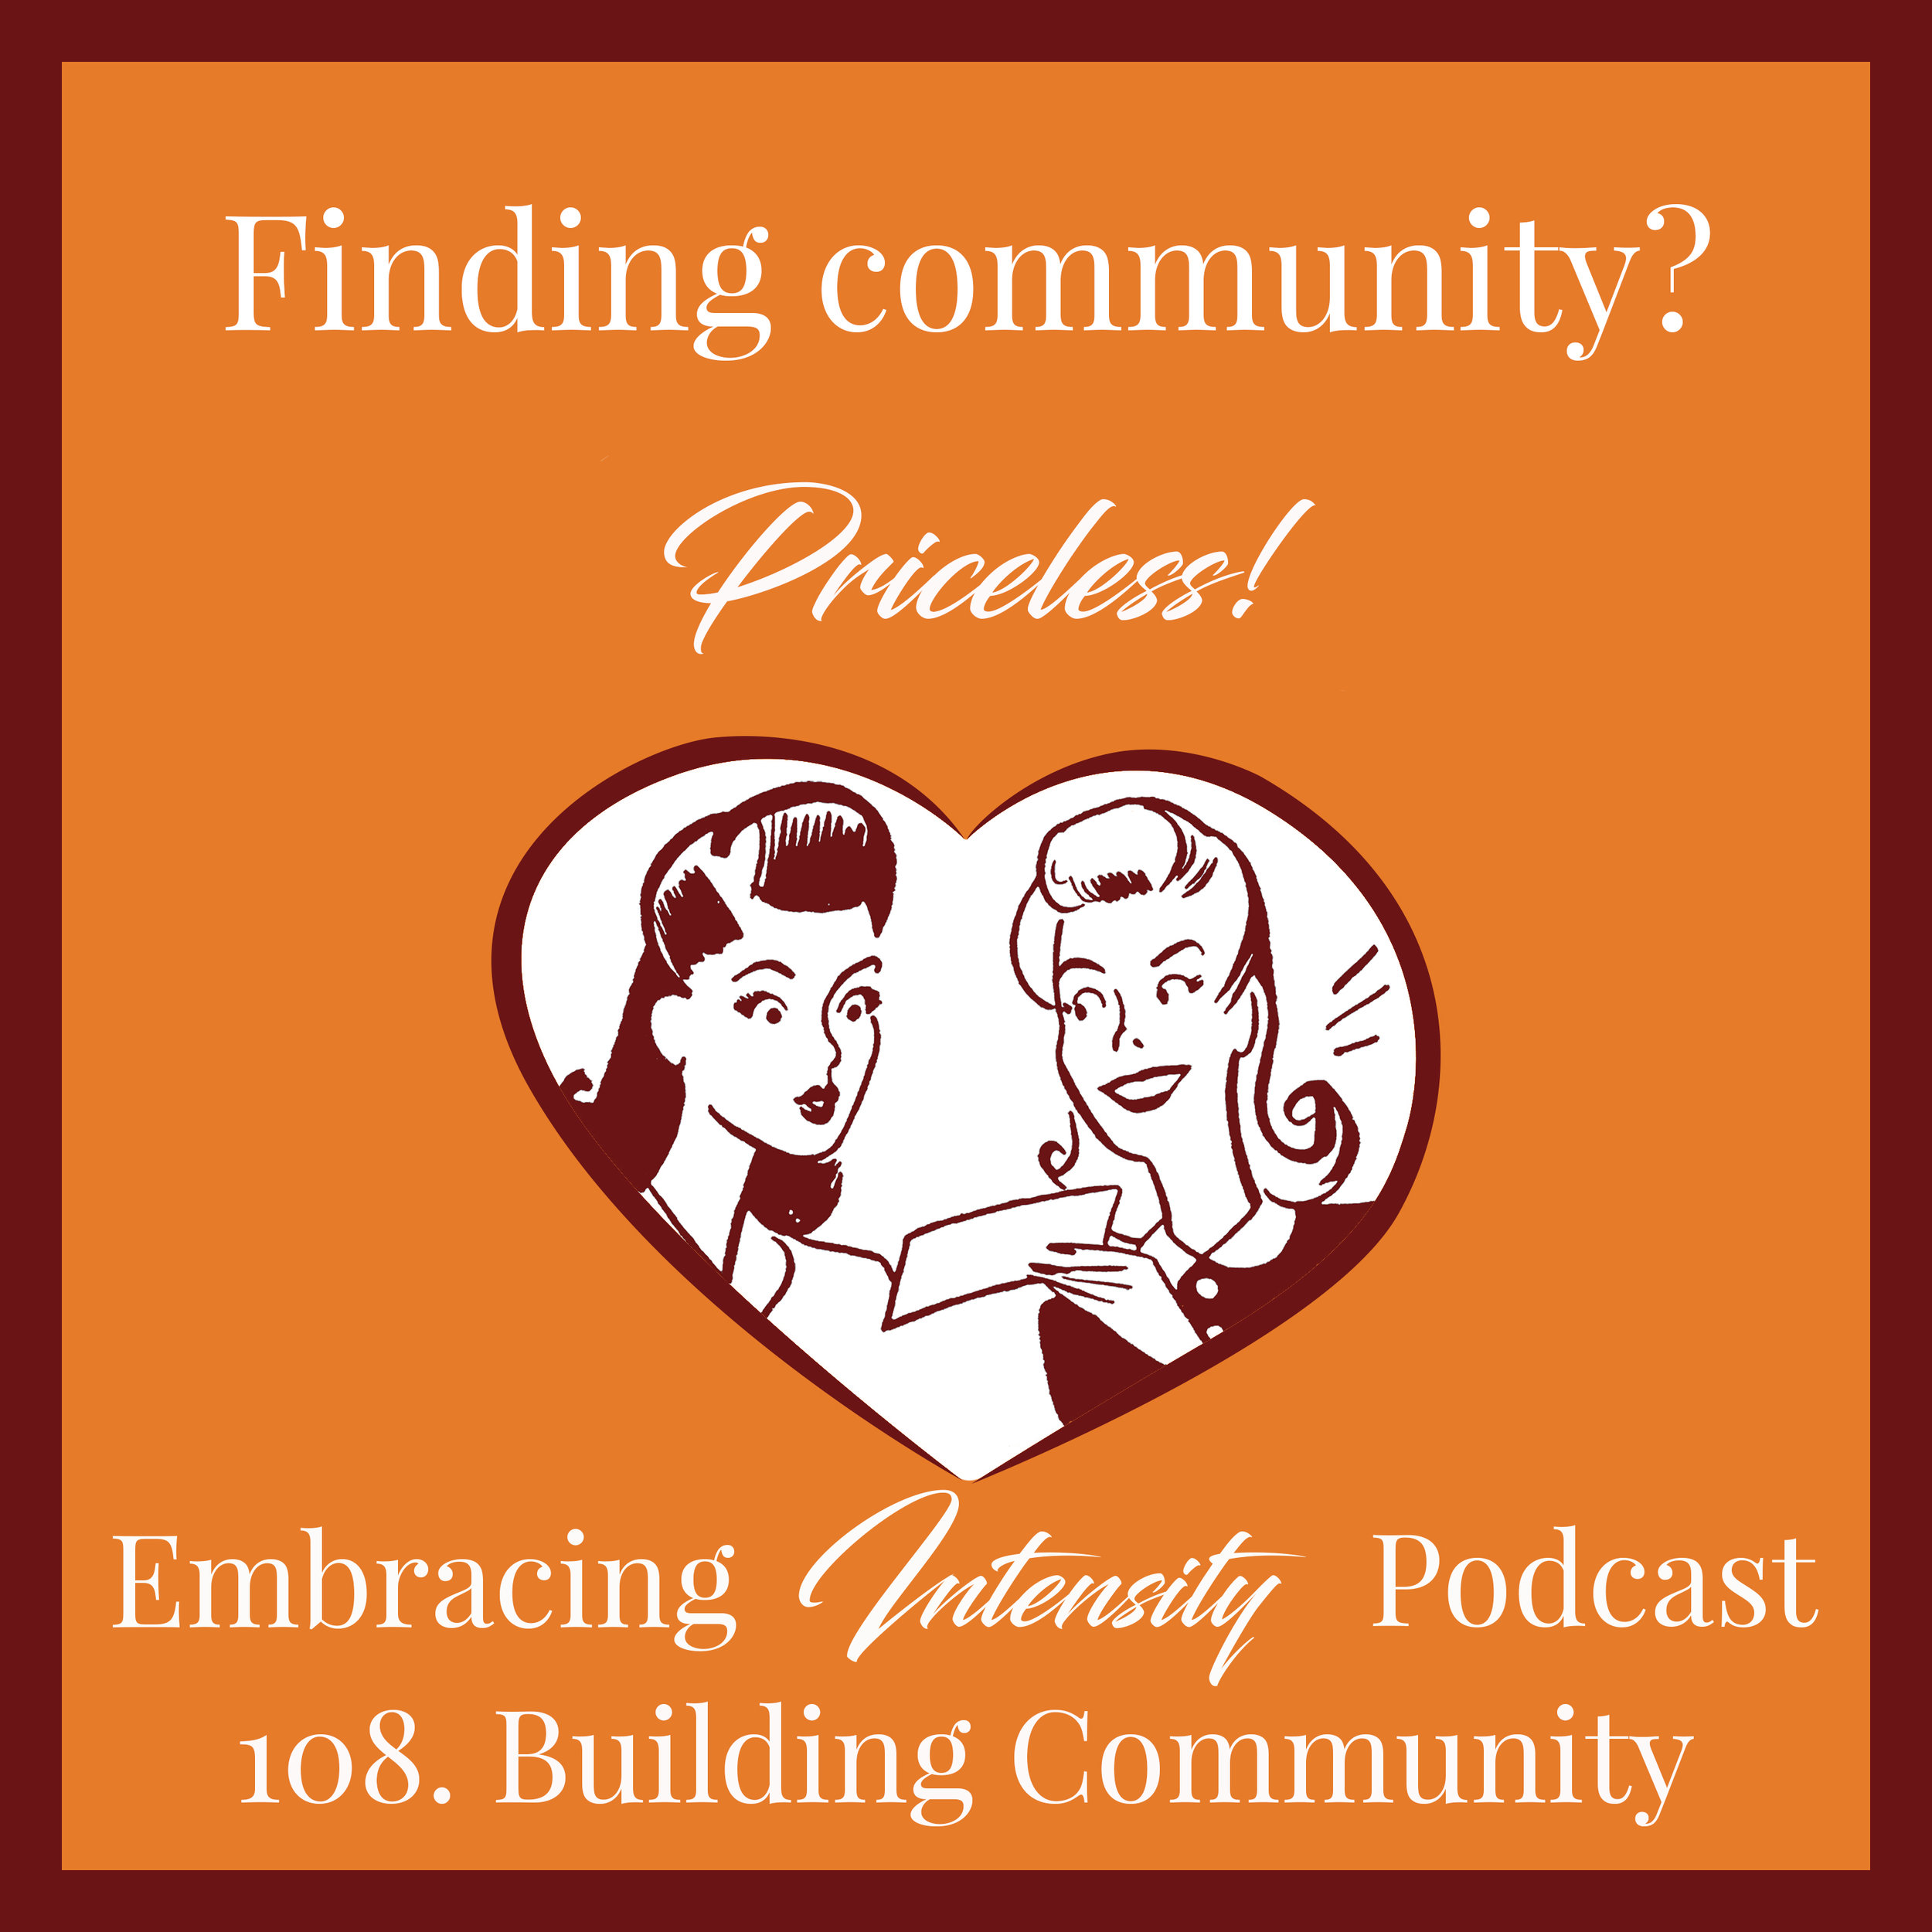 Embracing Intensity Podcast - Creating Community